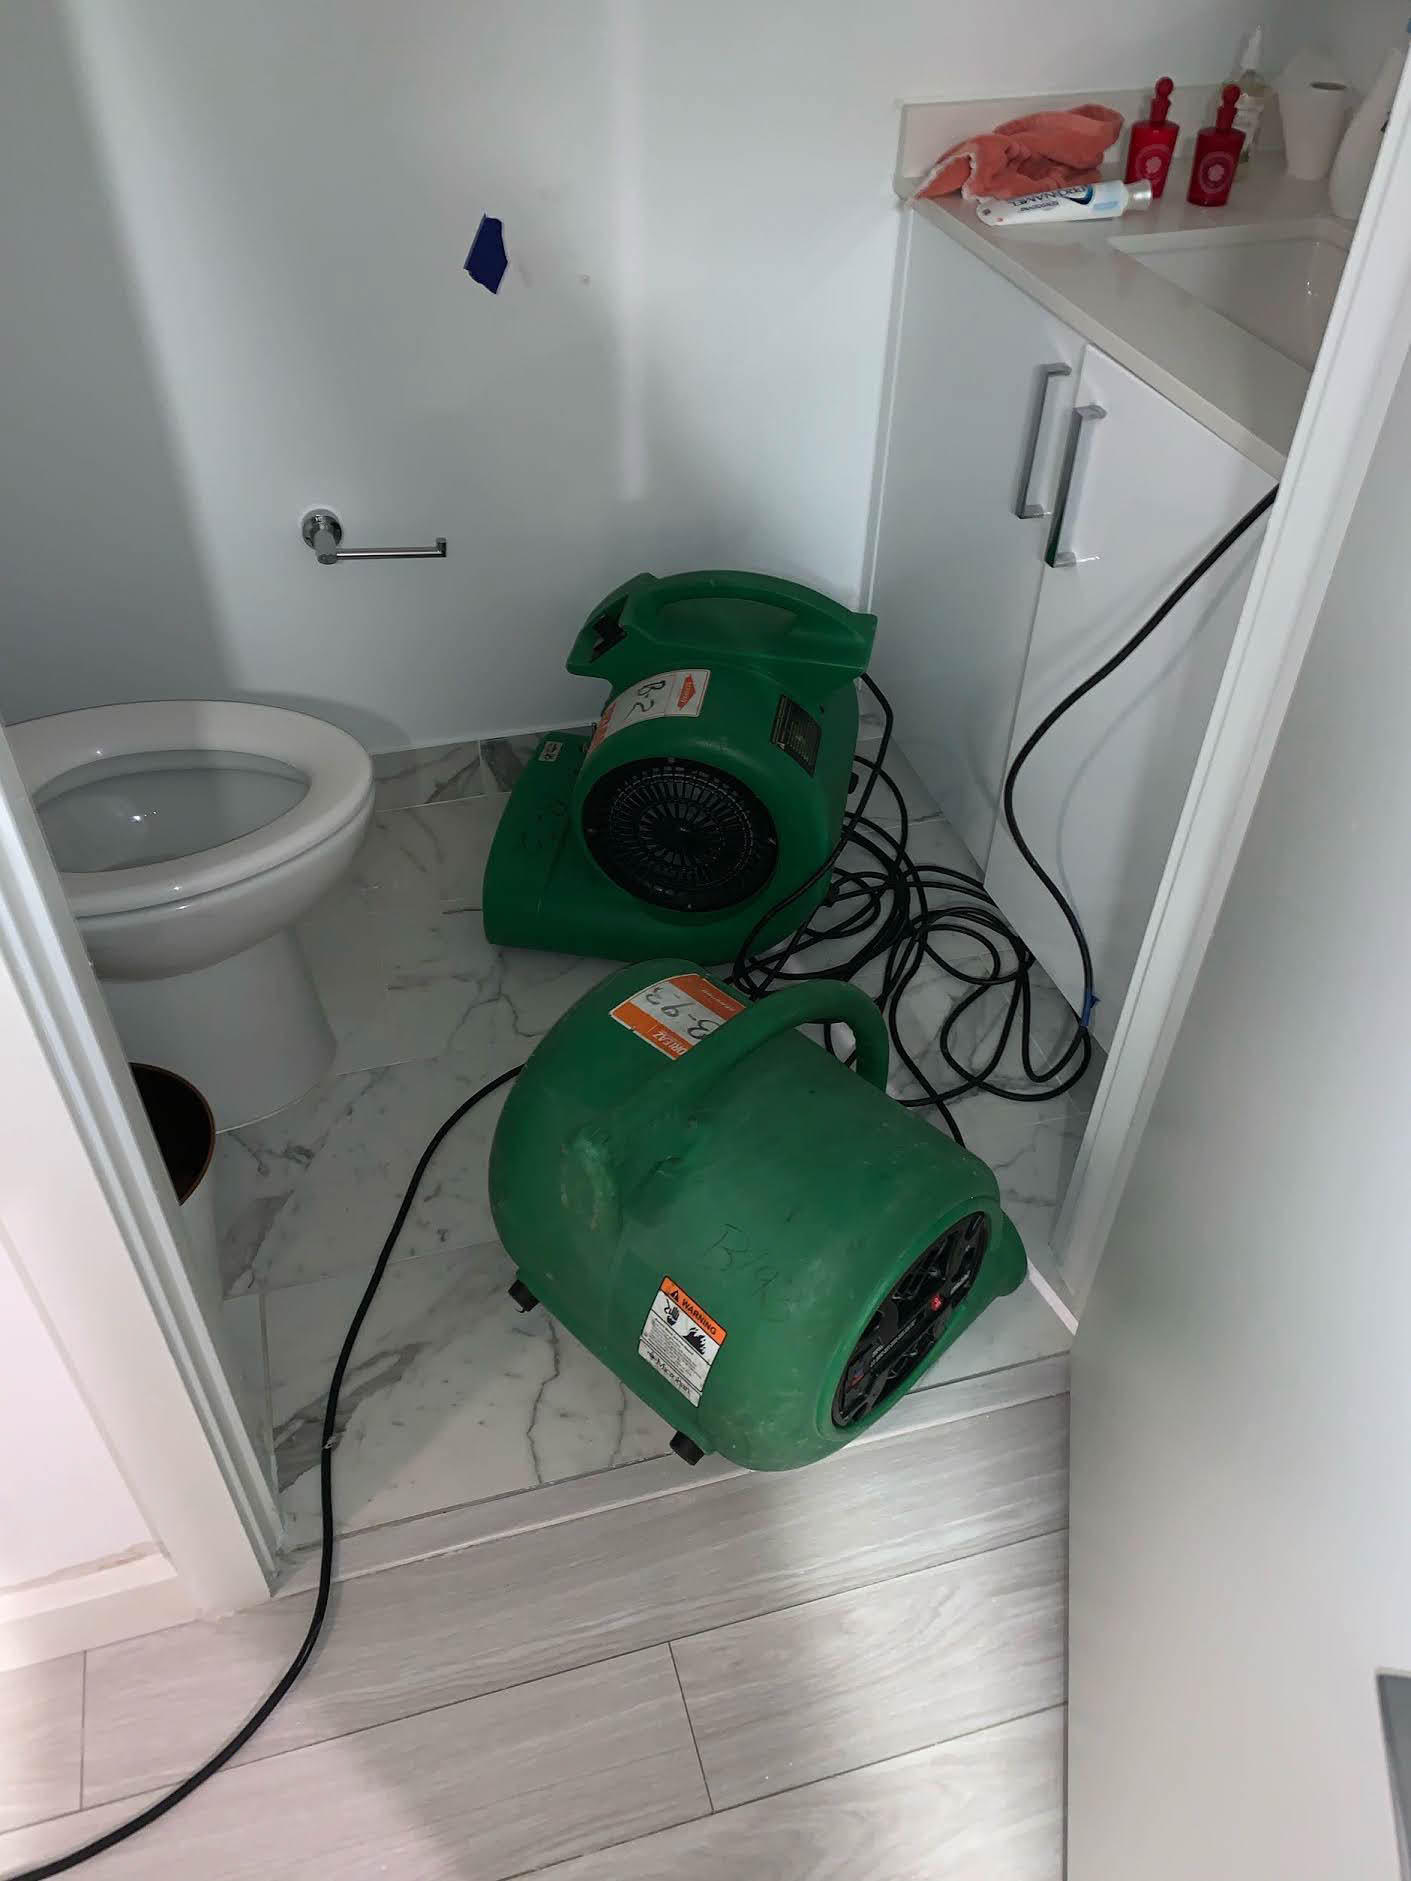 When the supply line to your toilet cracks, SERVPRO of Brickell is ready to help you clean up the mess.